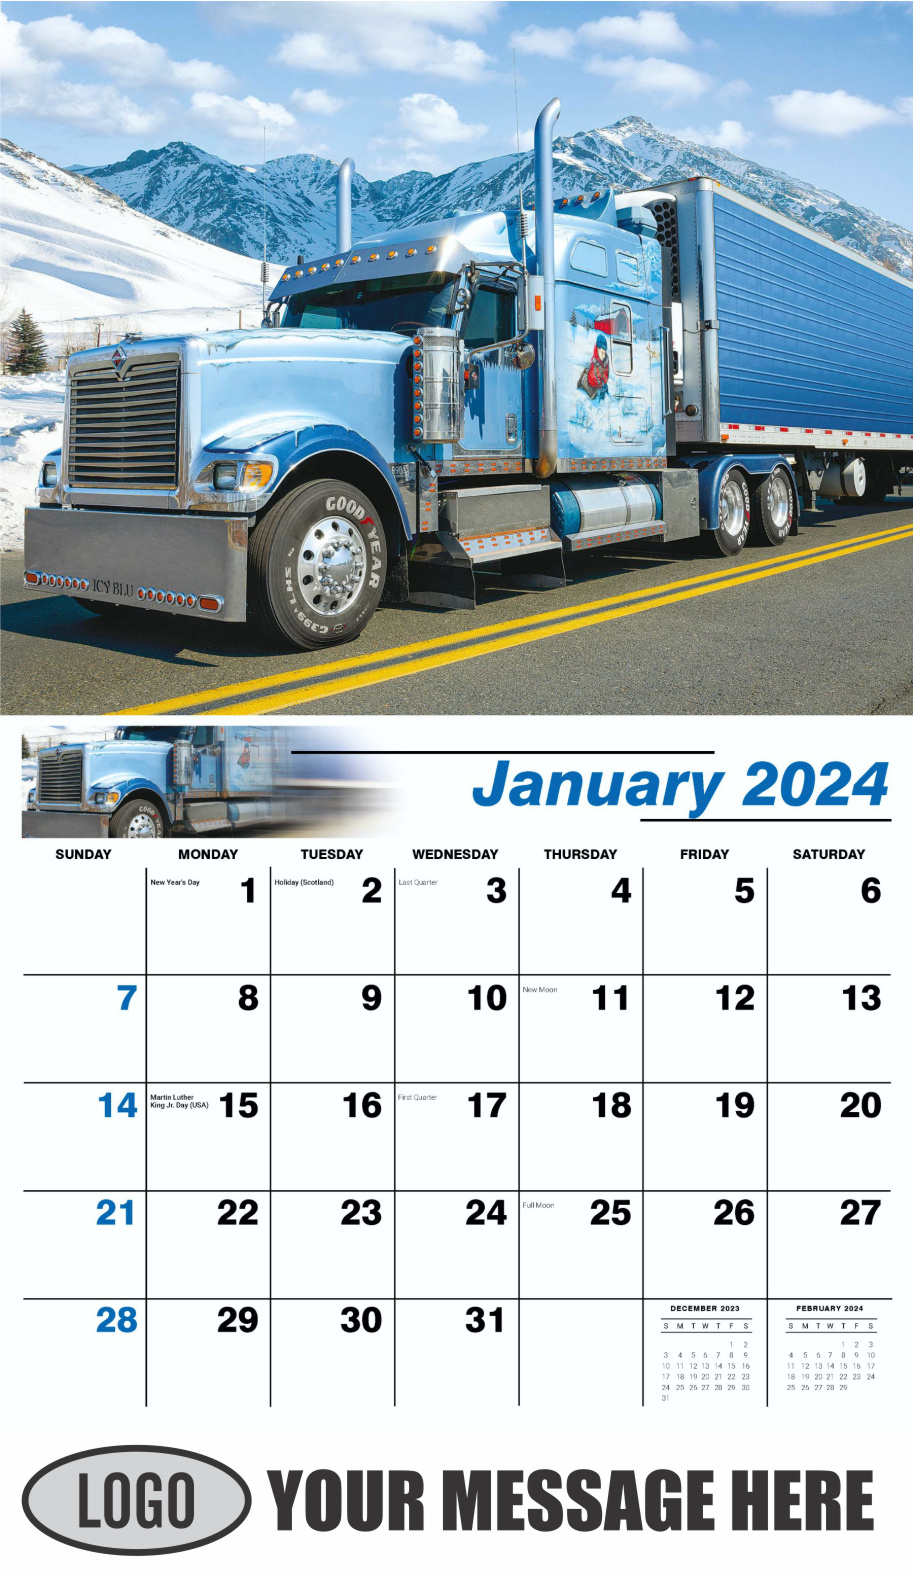 Kings of the Road 2024 Automotive Business Promotional Calendar - January